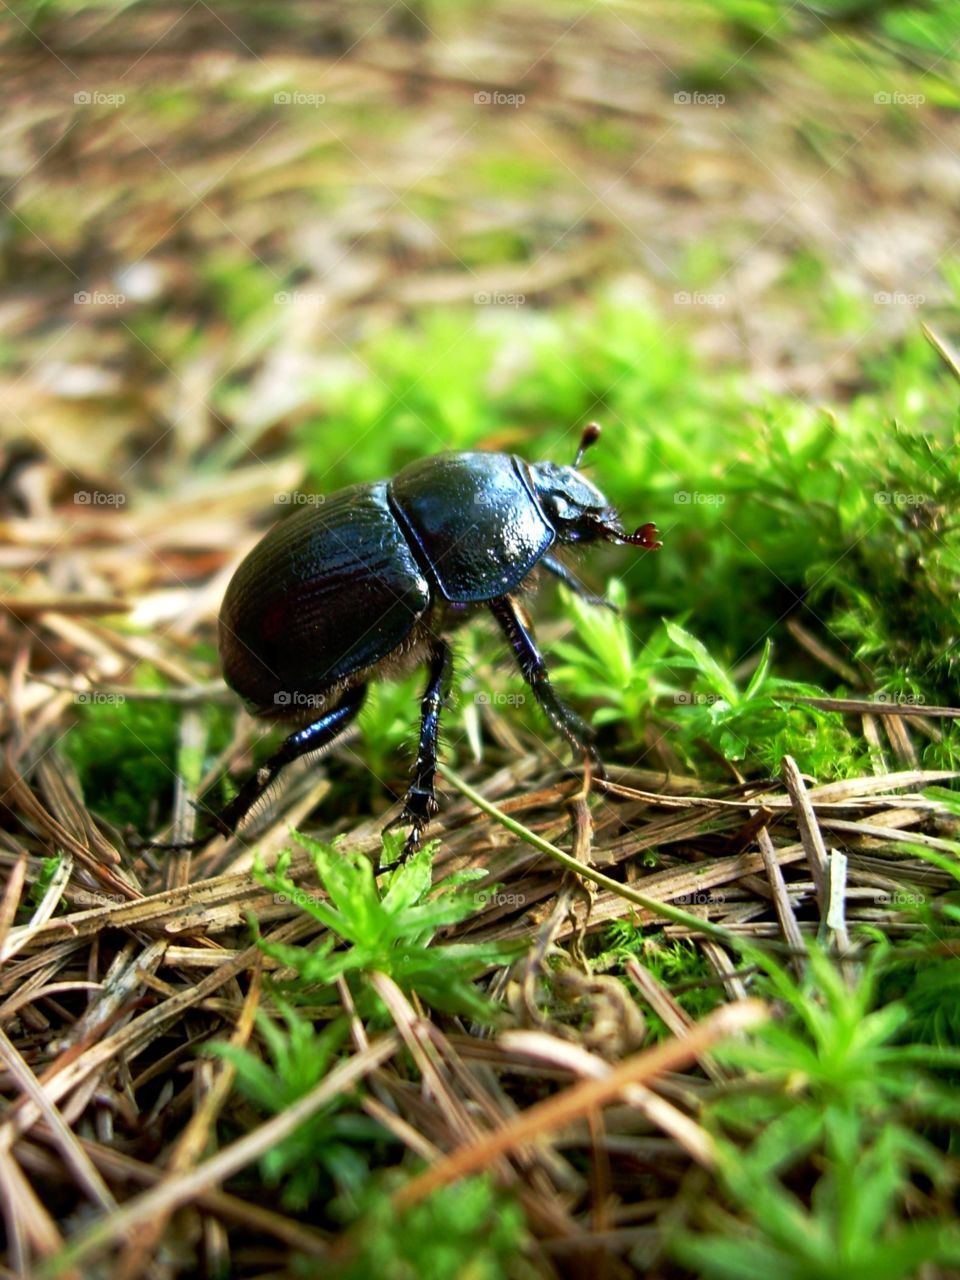 Darkly colored dung beetle 